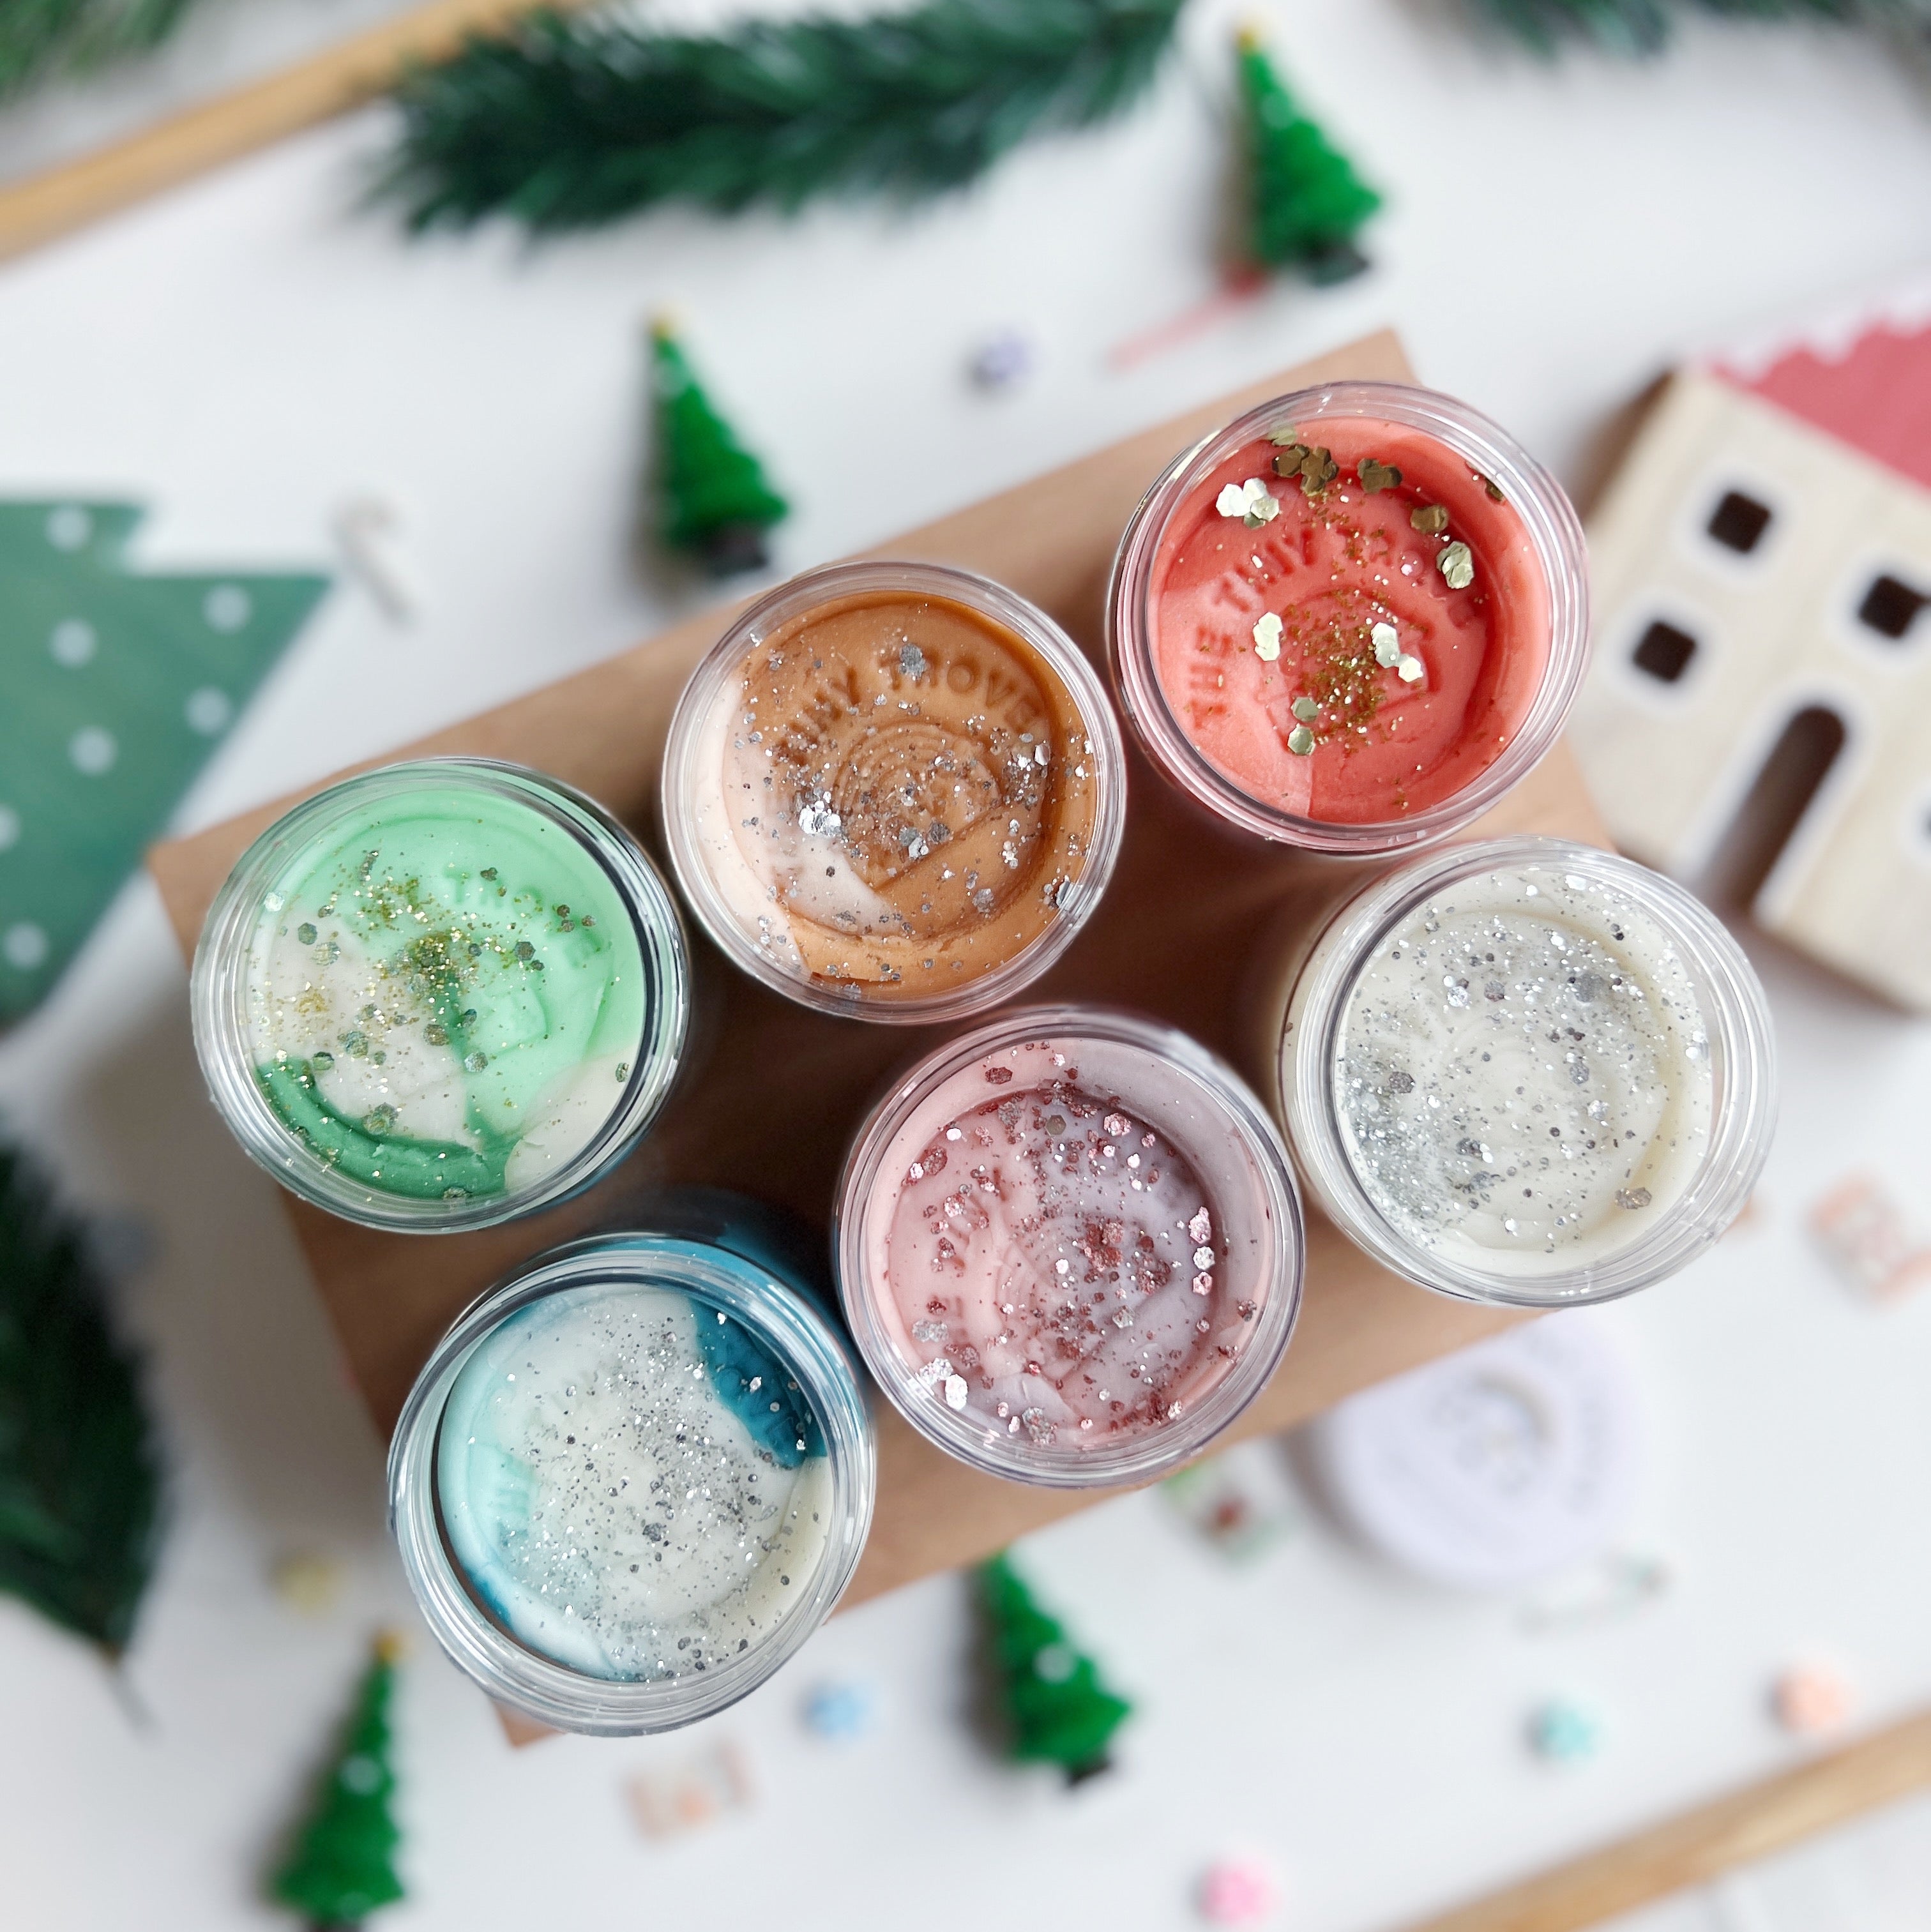 Winter Whimsy Glitter Play Dough Set (Limited Time Only!)